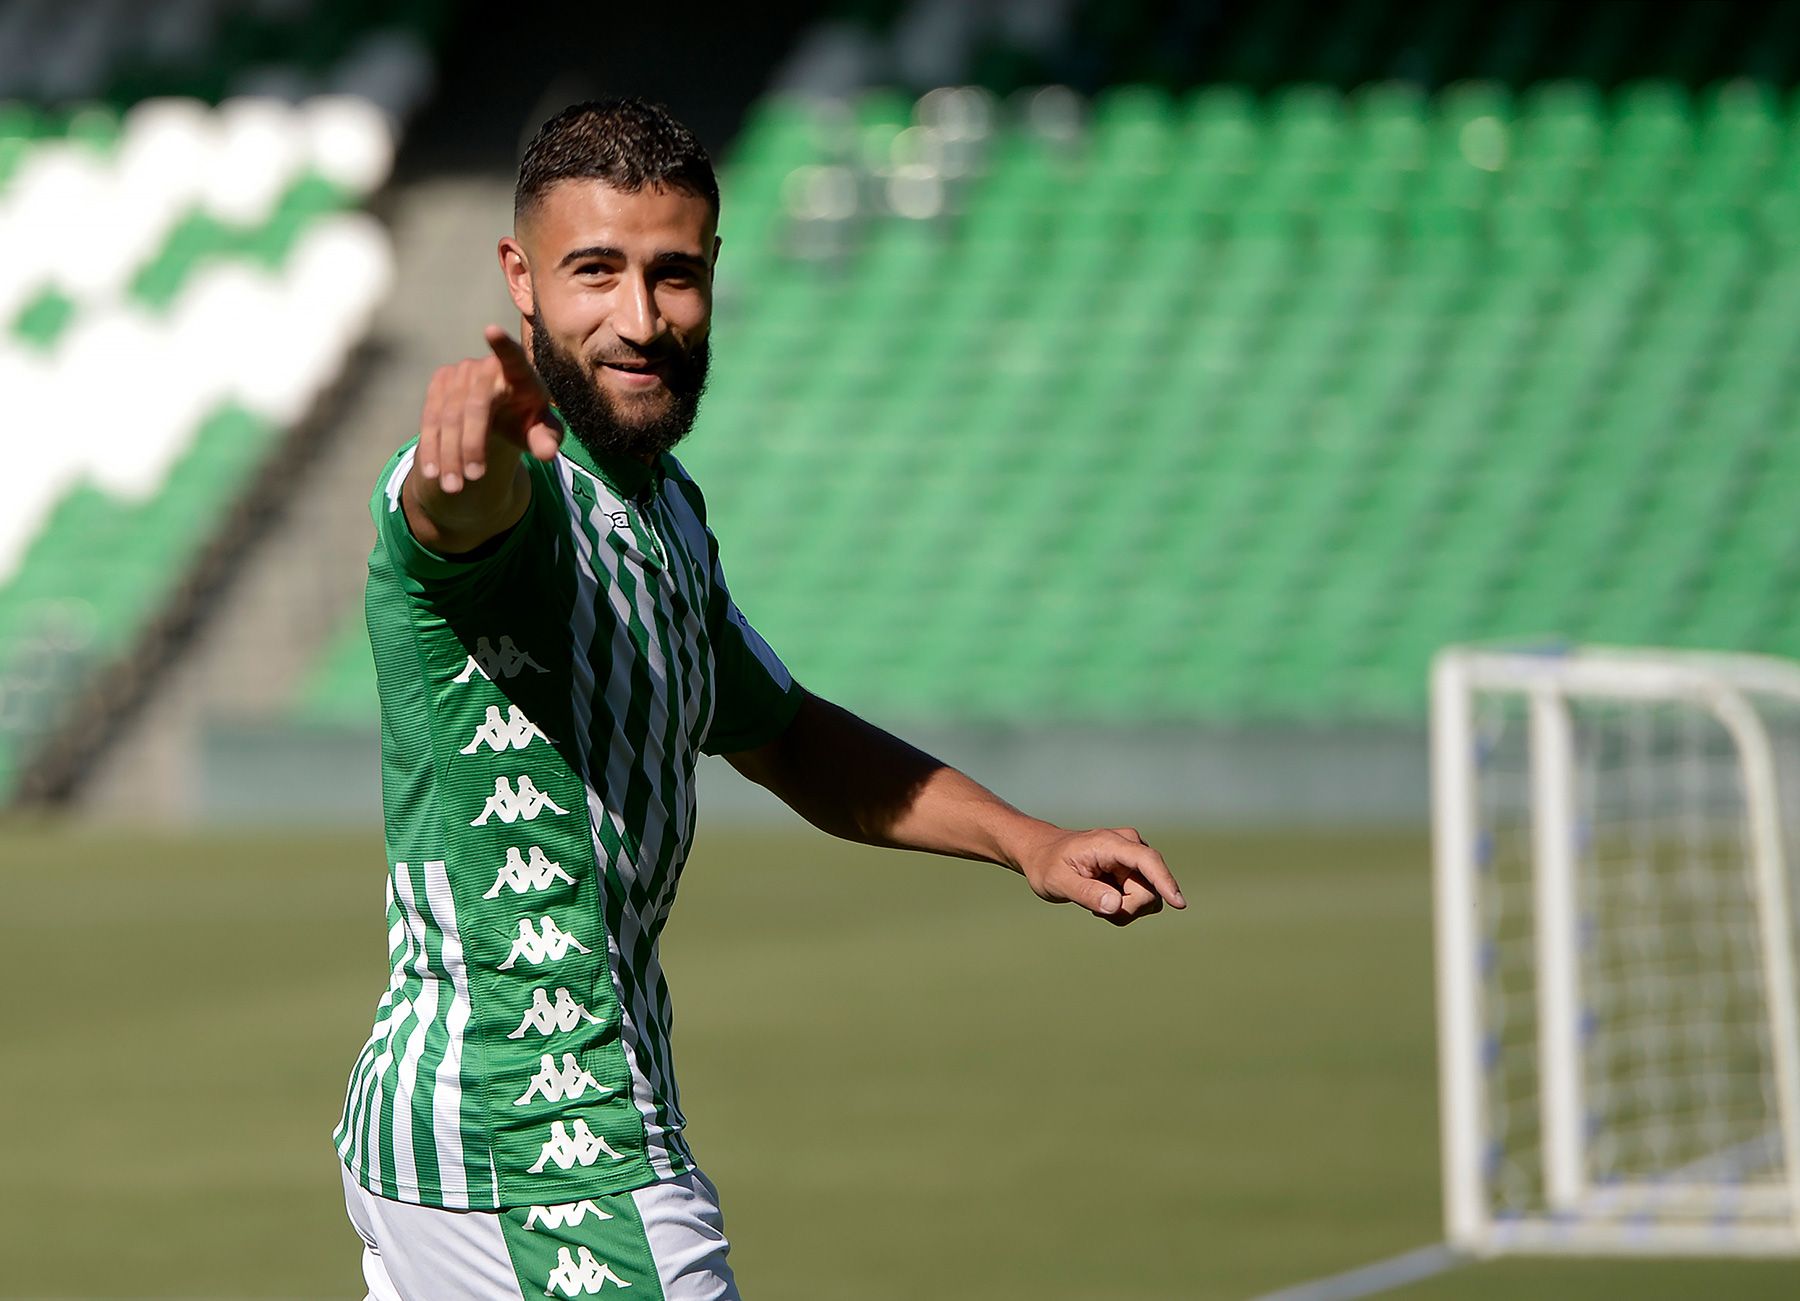 Fekir The day of his presentation with the Betis